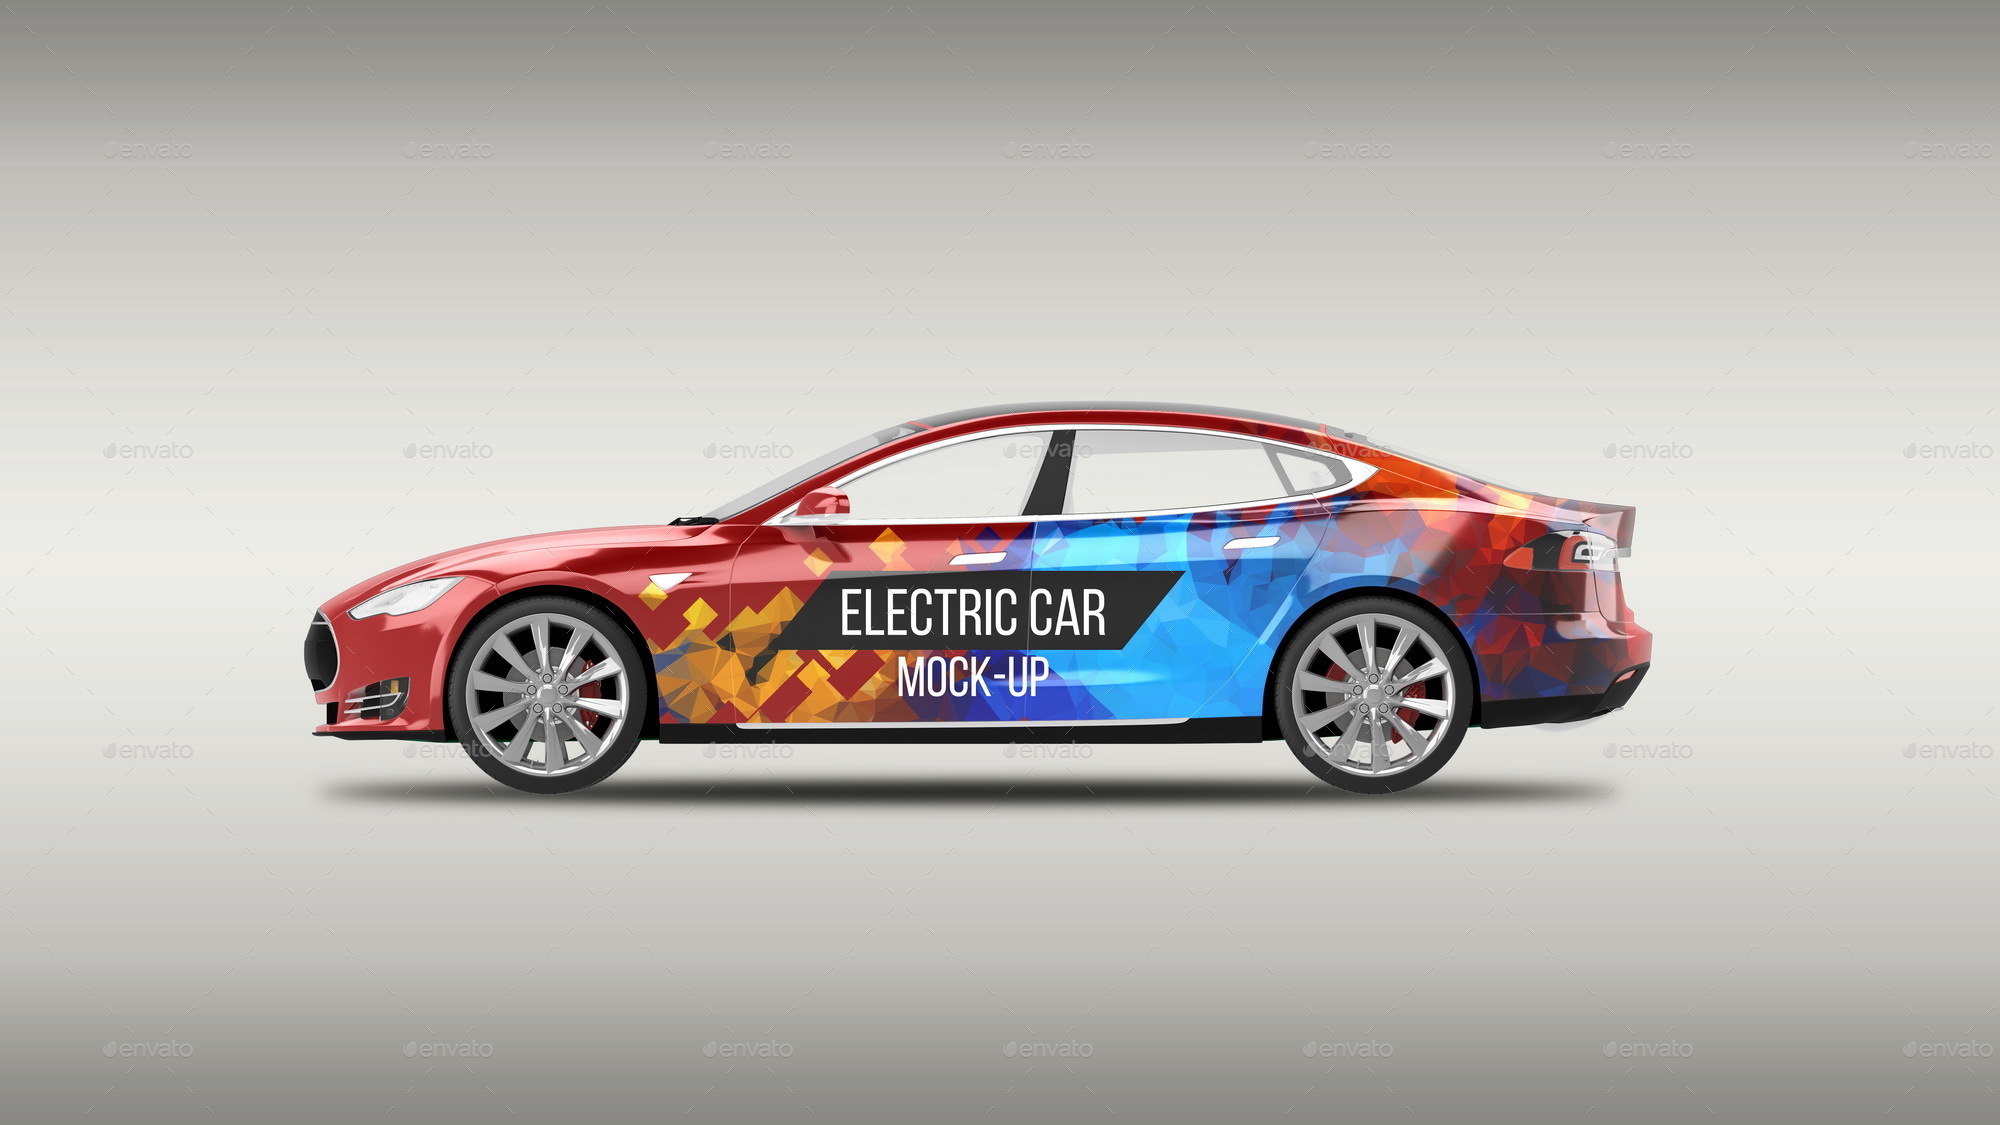 Download Electric Car Mock-Up by AlexKond | GraphicRiver